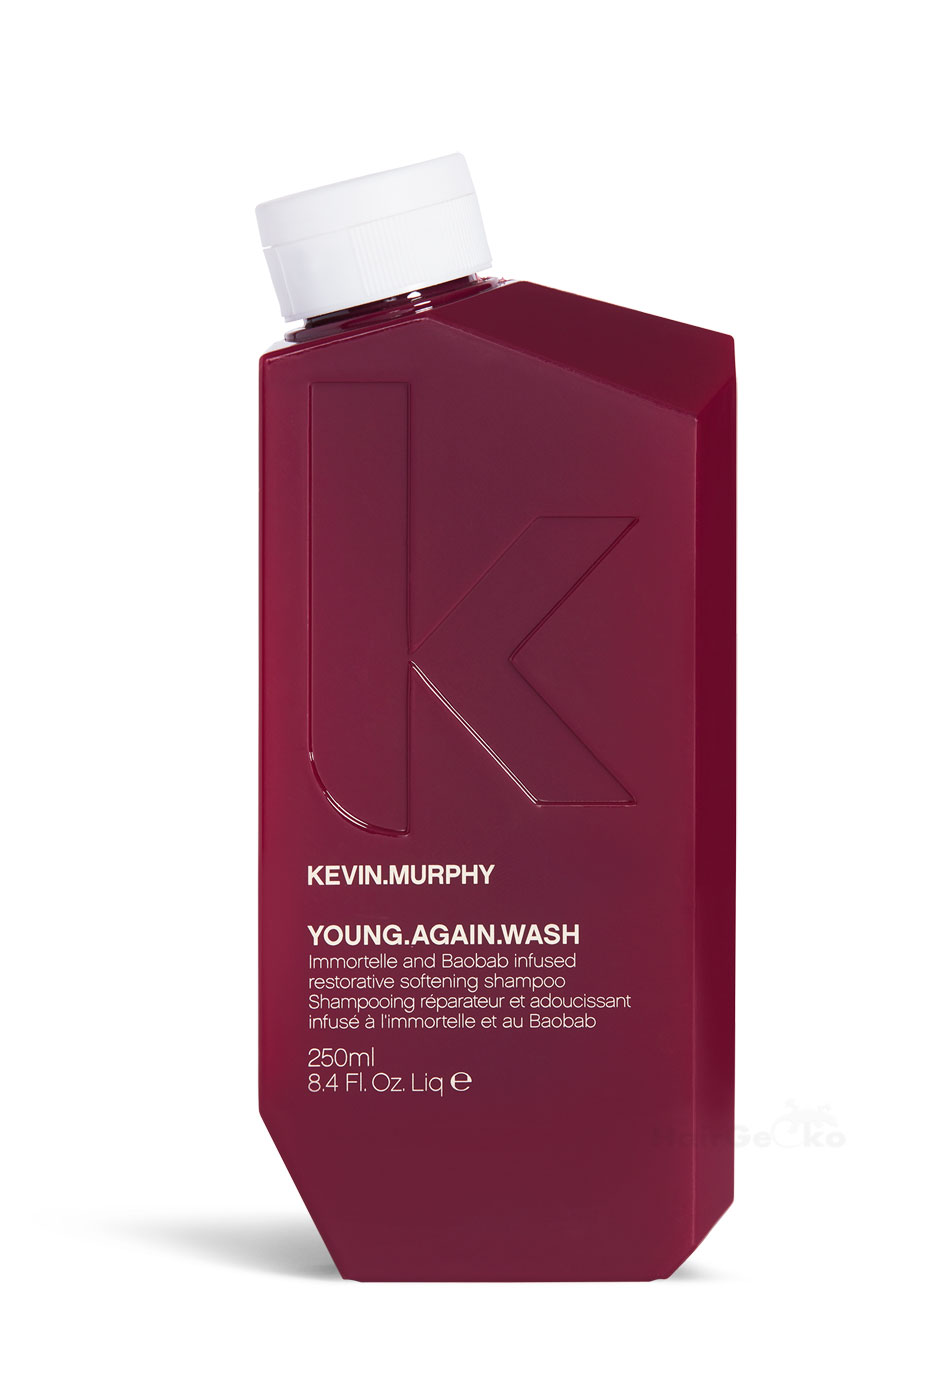 KEVIN.MURPHY YOUNG.AGAIN WASH 250 ml